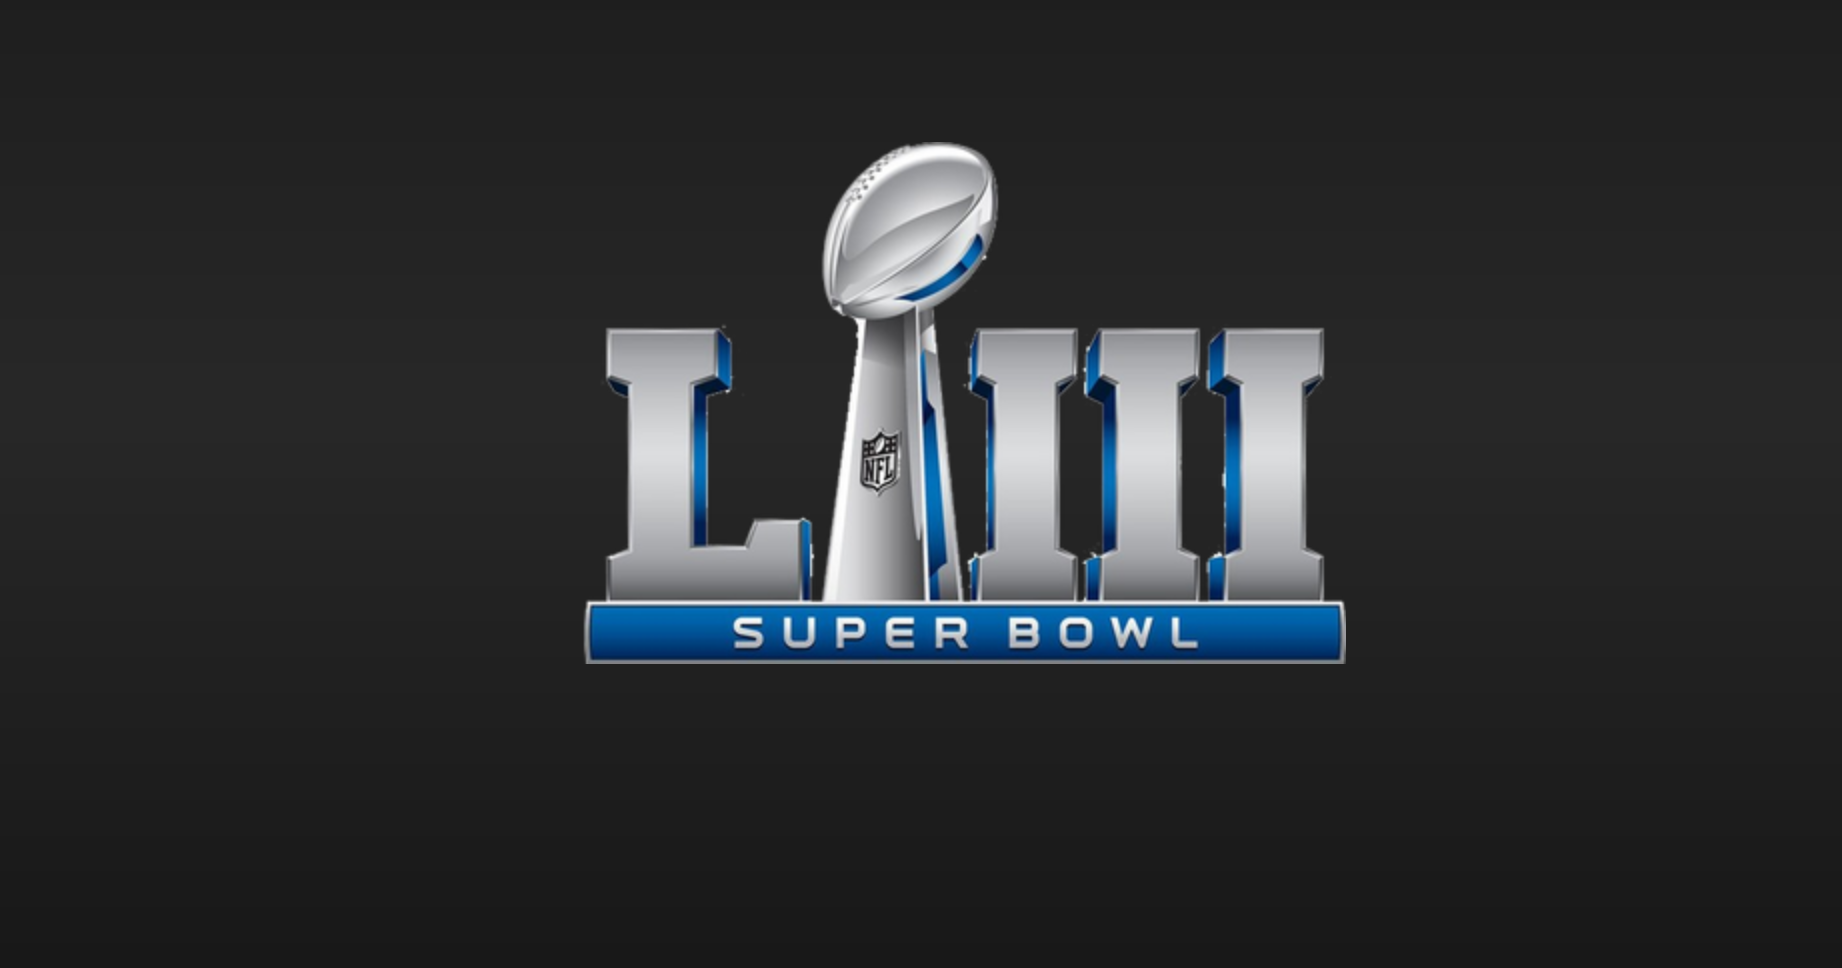 What The Super Bowl Logo Can Teach You About Conference Marketing Meetingsnet